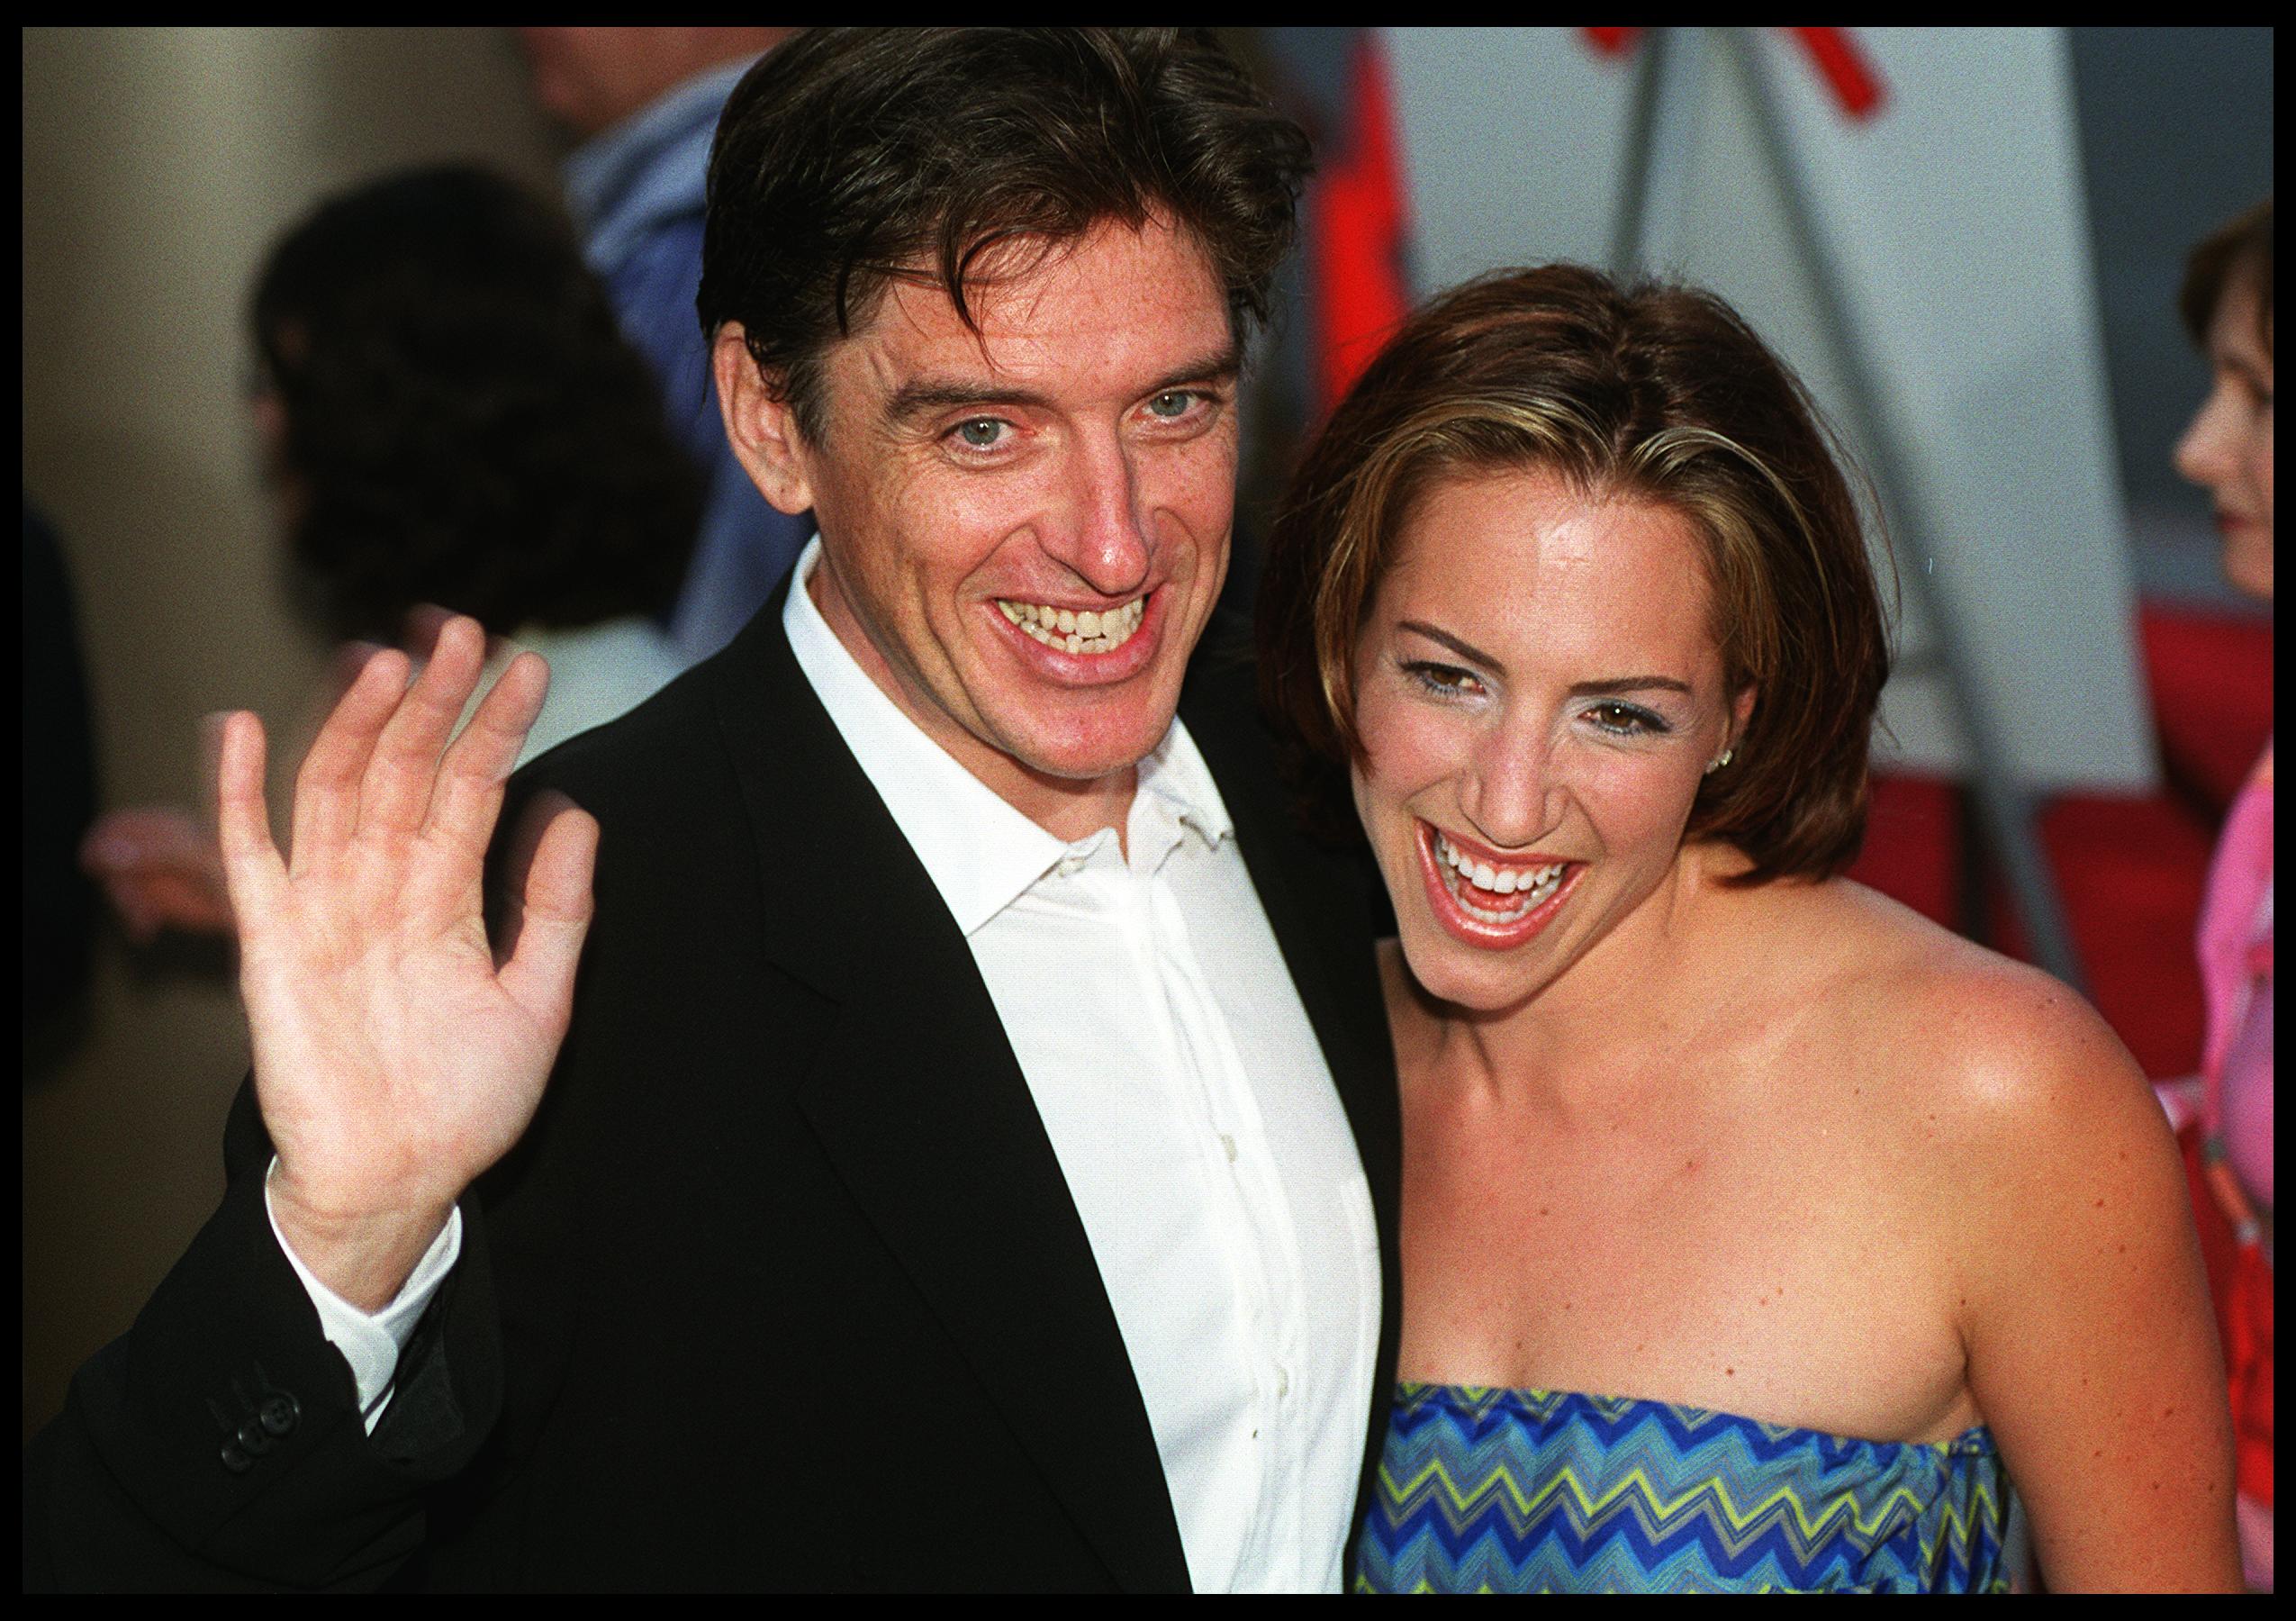 Craig Ferguson and his wife ex-Sascha on August 1, 2000, at the Egyptian Theater, Hollywood, CA. | Source: Getty Images